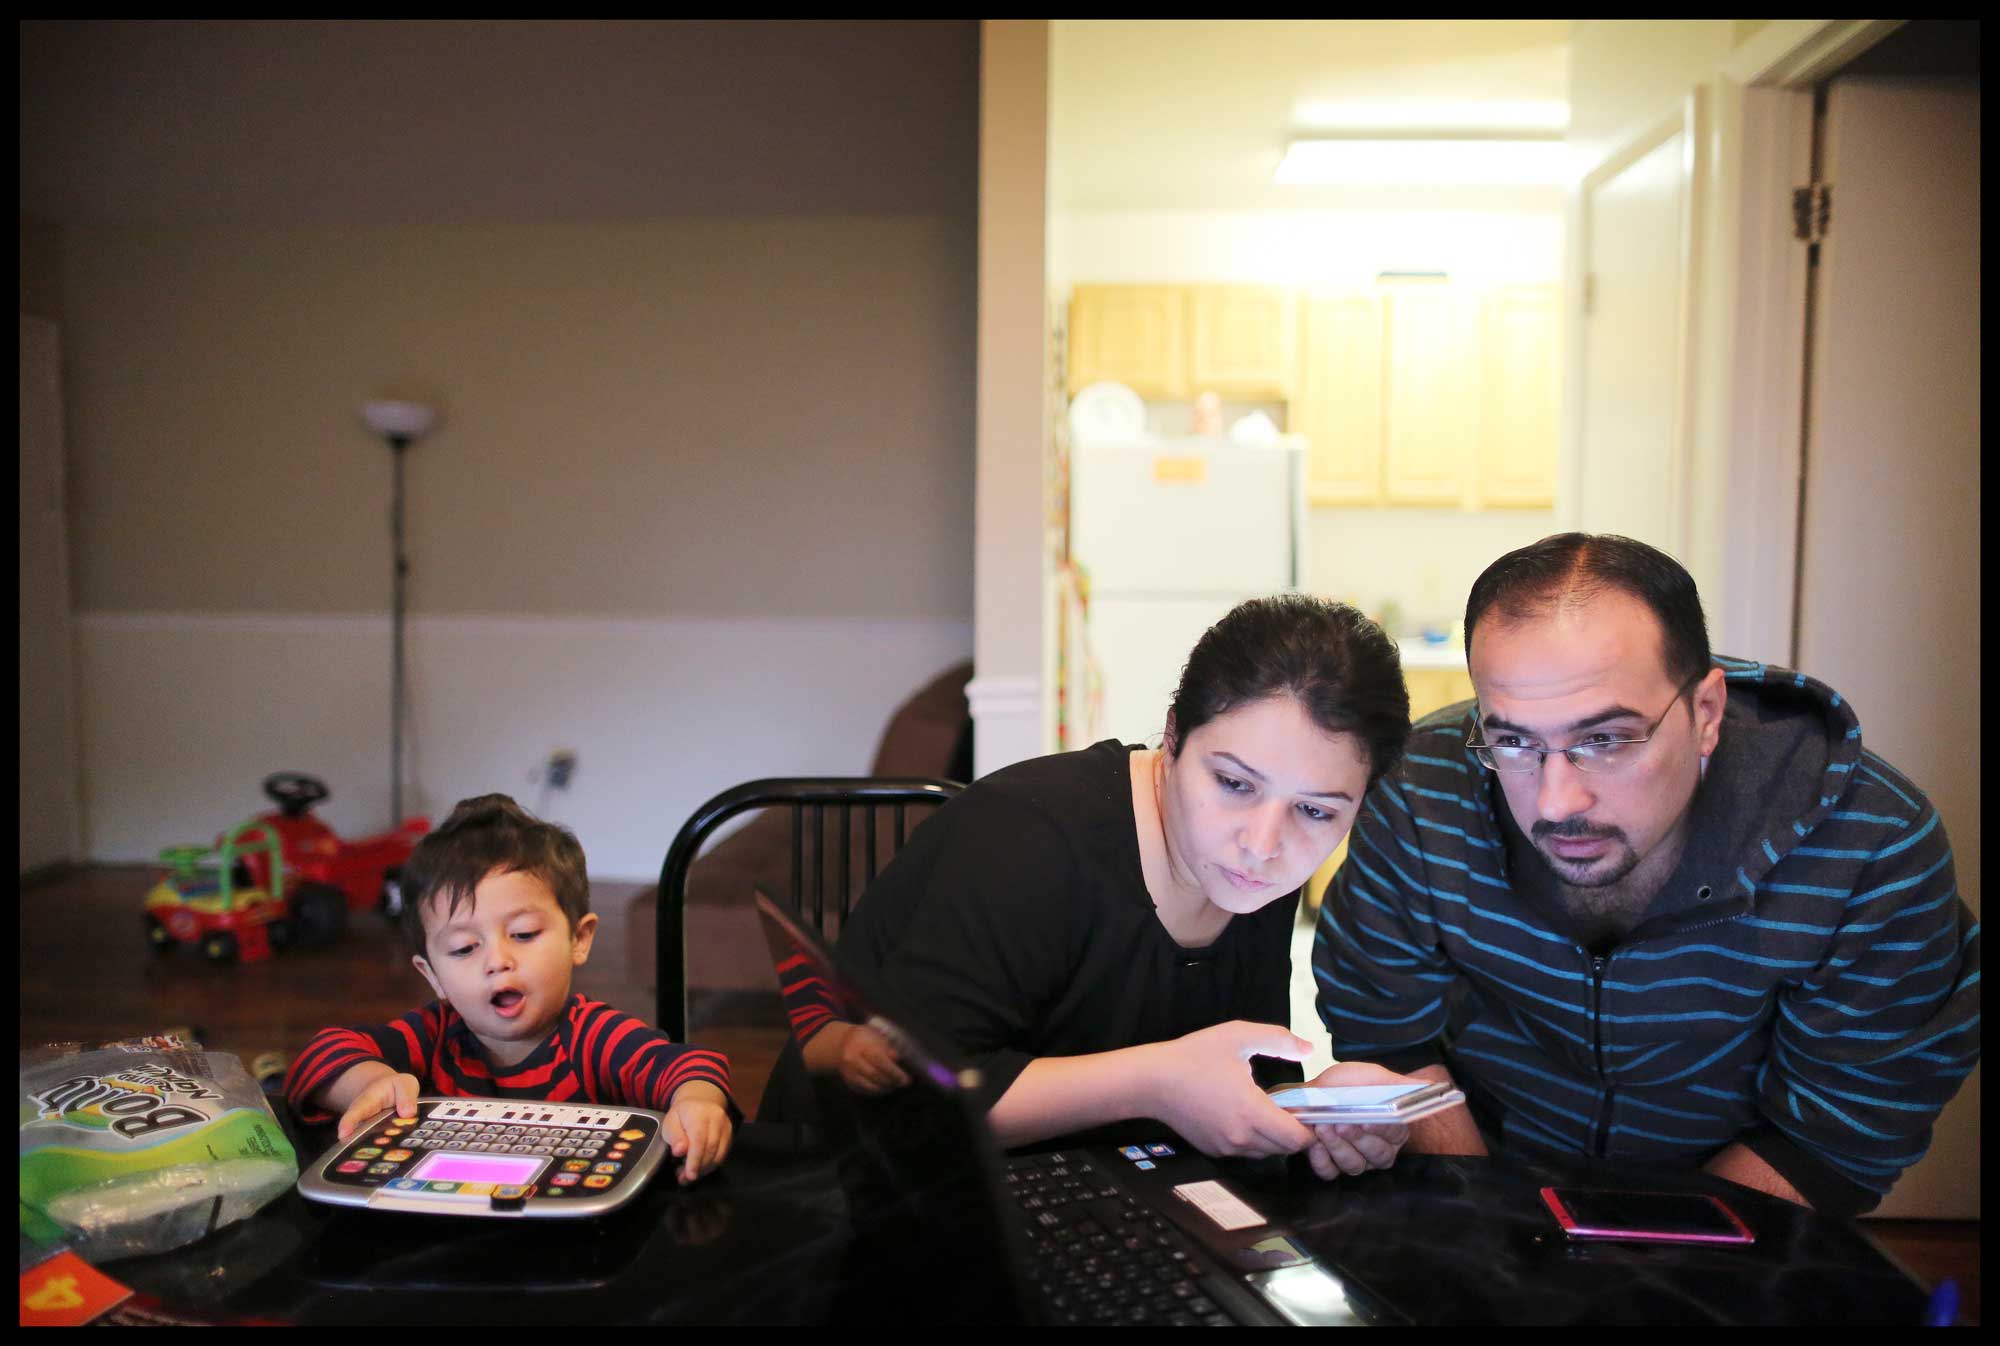 A refugee family working on job applications online. IRC/CBibby